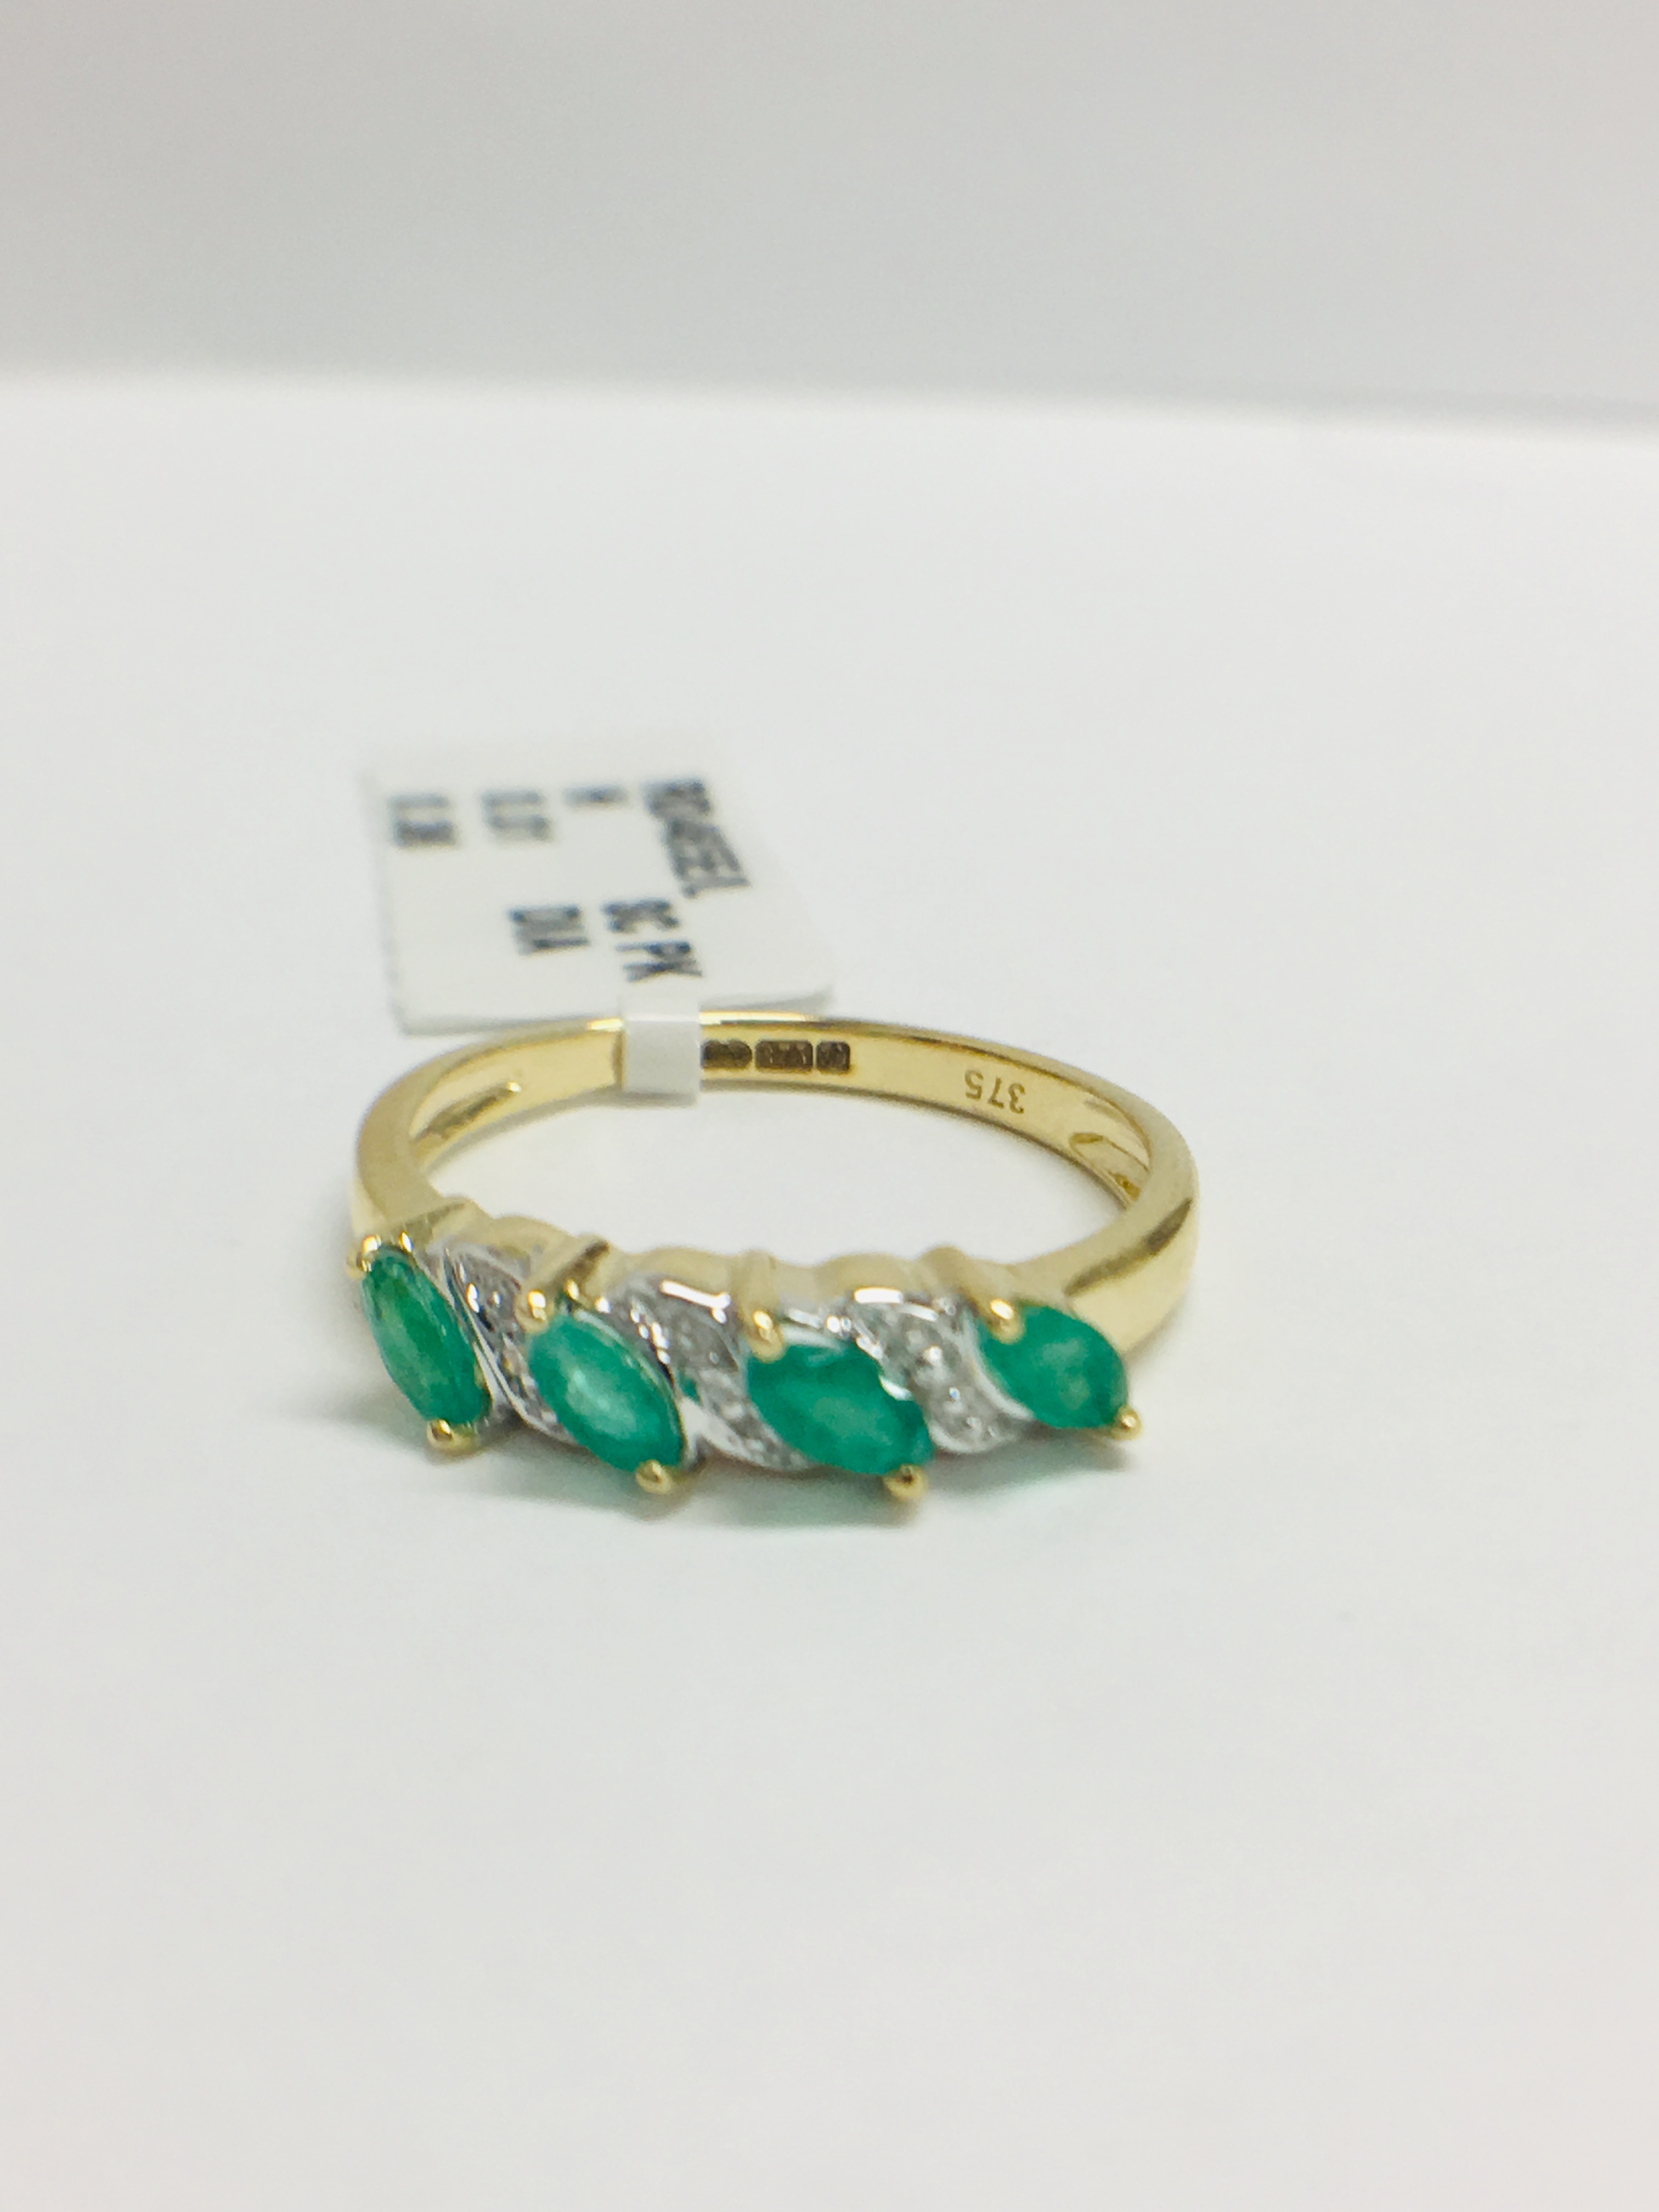 9ct yellow gold emerald and diamond ring - Image 3 of 11